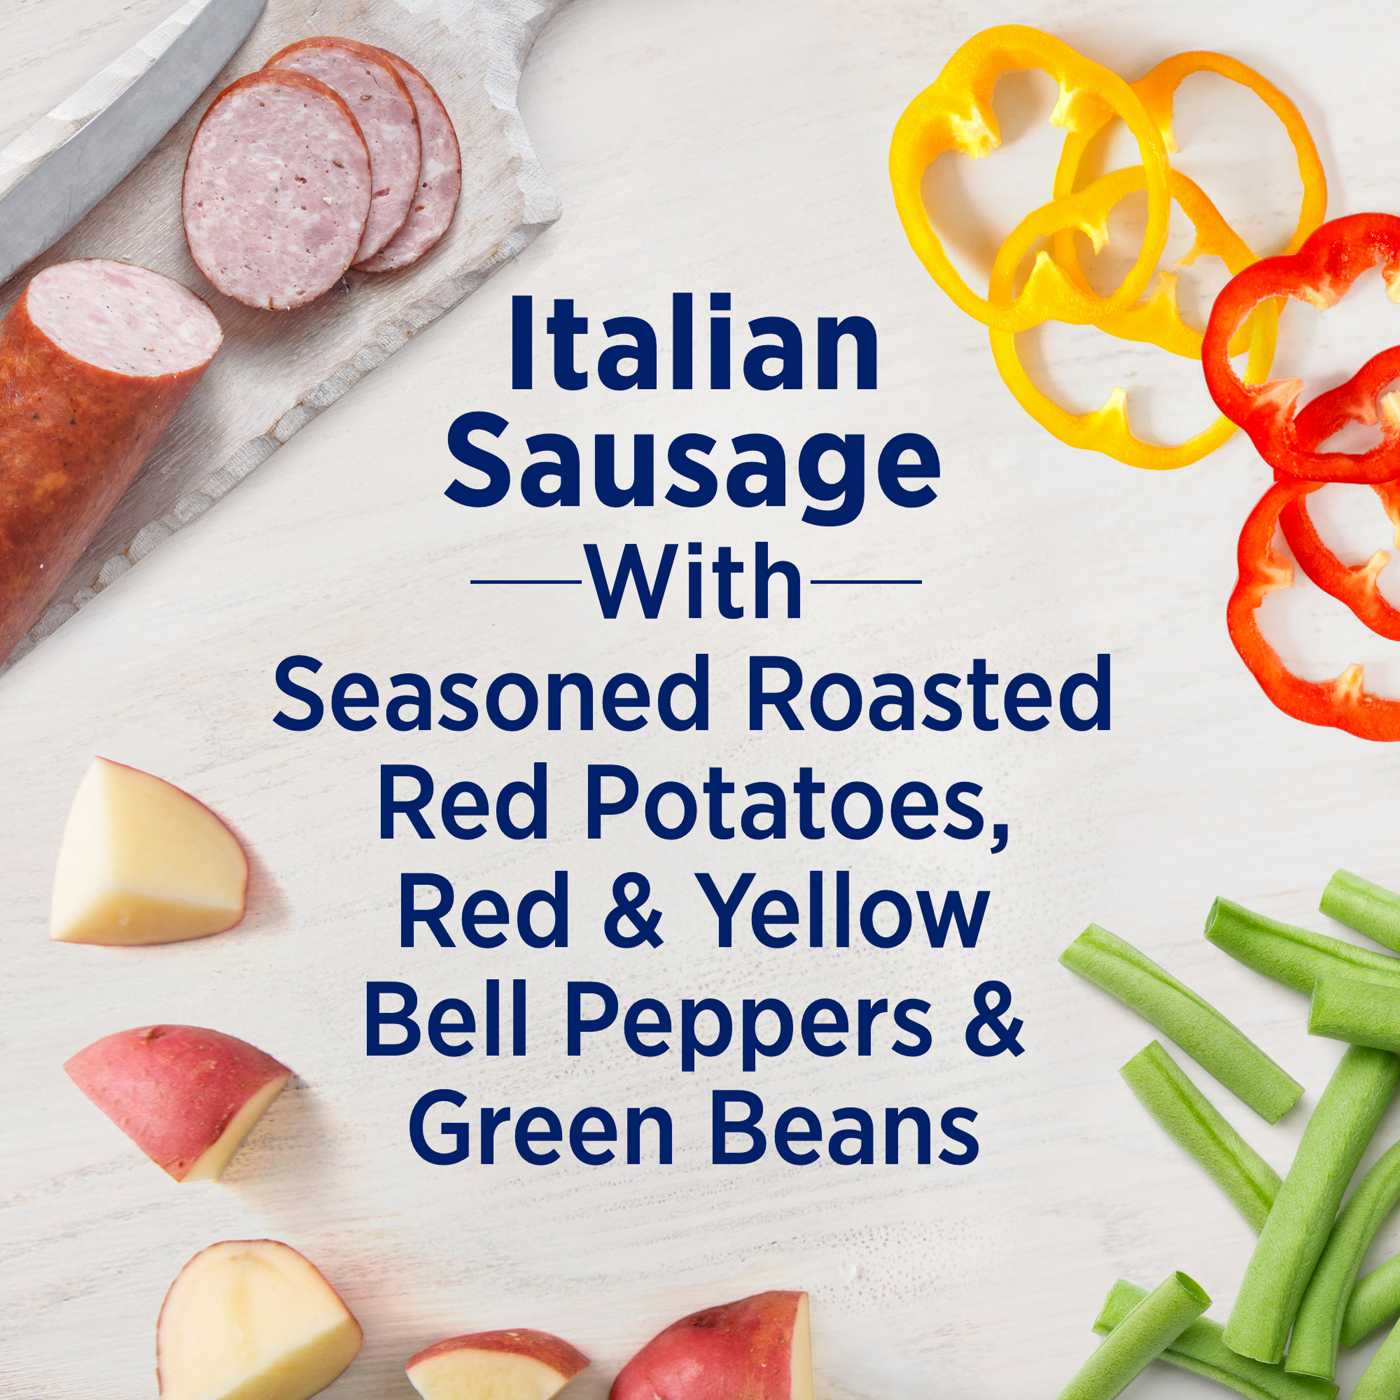 Birds Eye Voila! Italian Sausage & Peppers Frozen Sheet Pan Meal - Family-Size; image 2 of 4